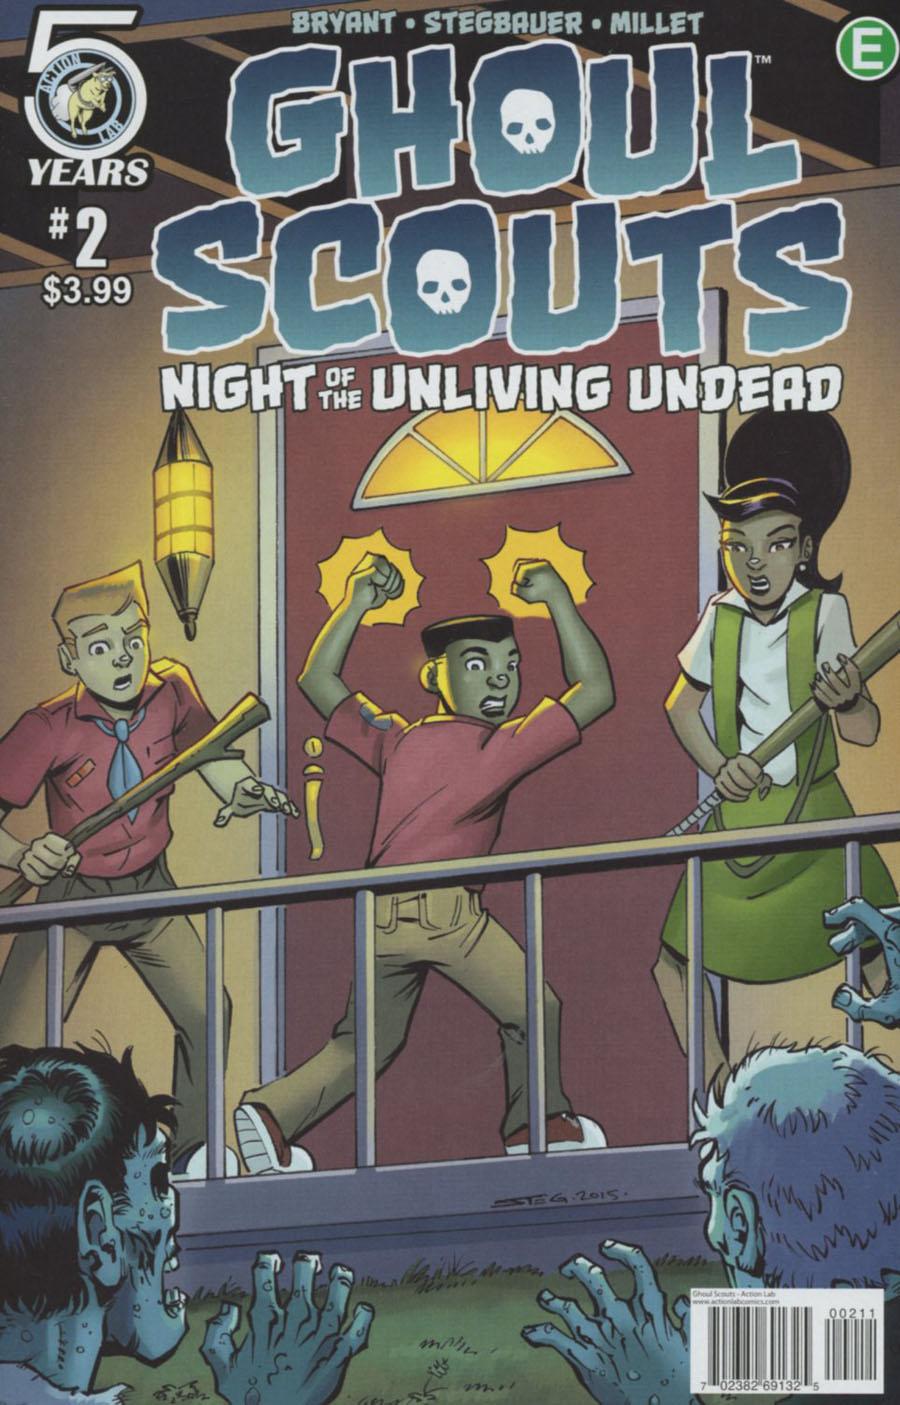 Ghoul Scouts Night Of The Unliving Undead Vol. 1 #2